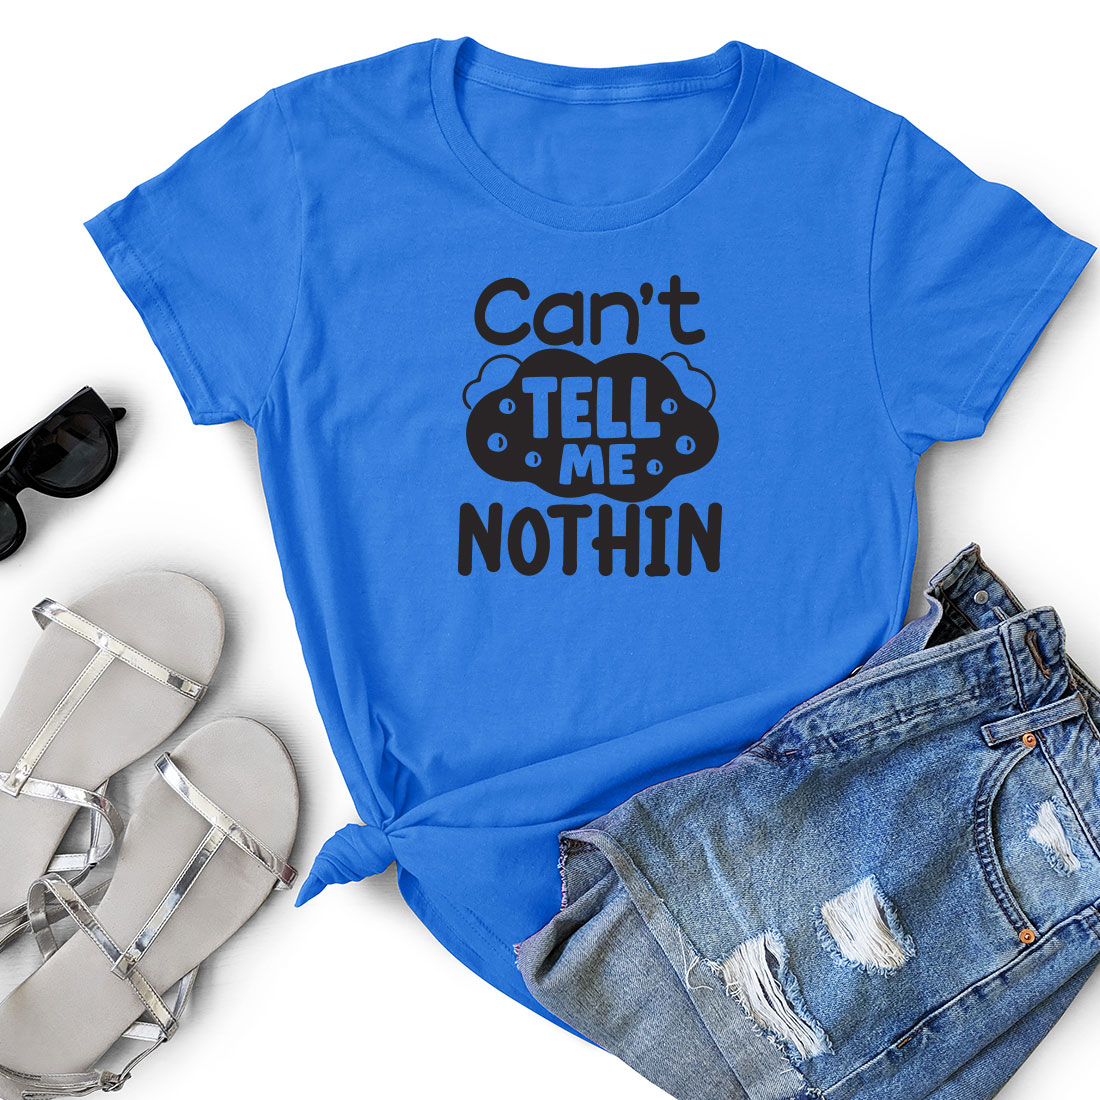 T - shirt that says can't tell me nothing.